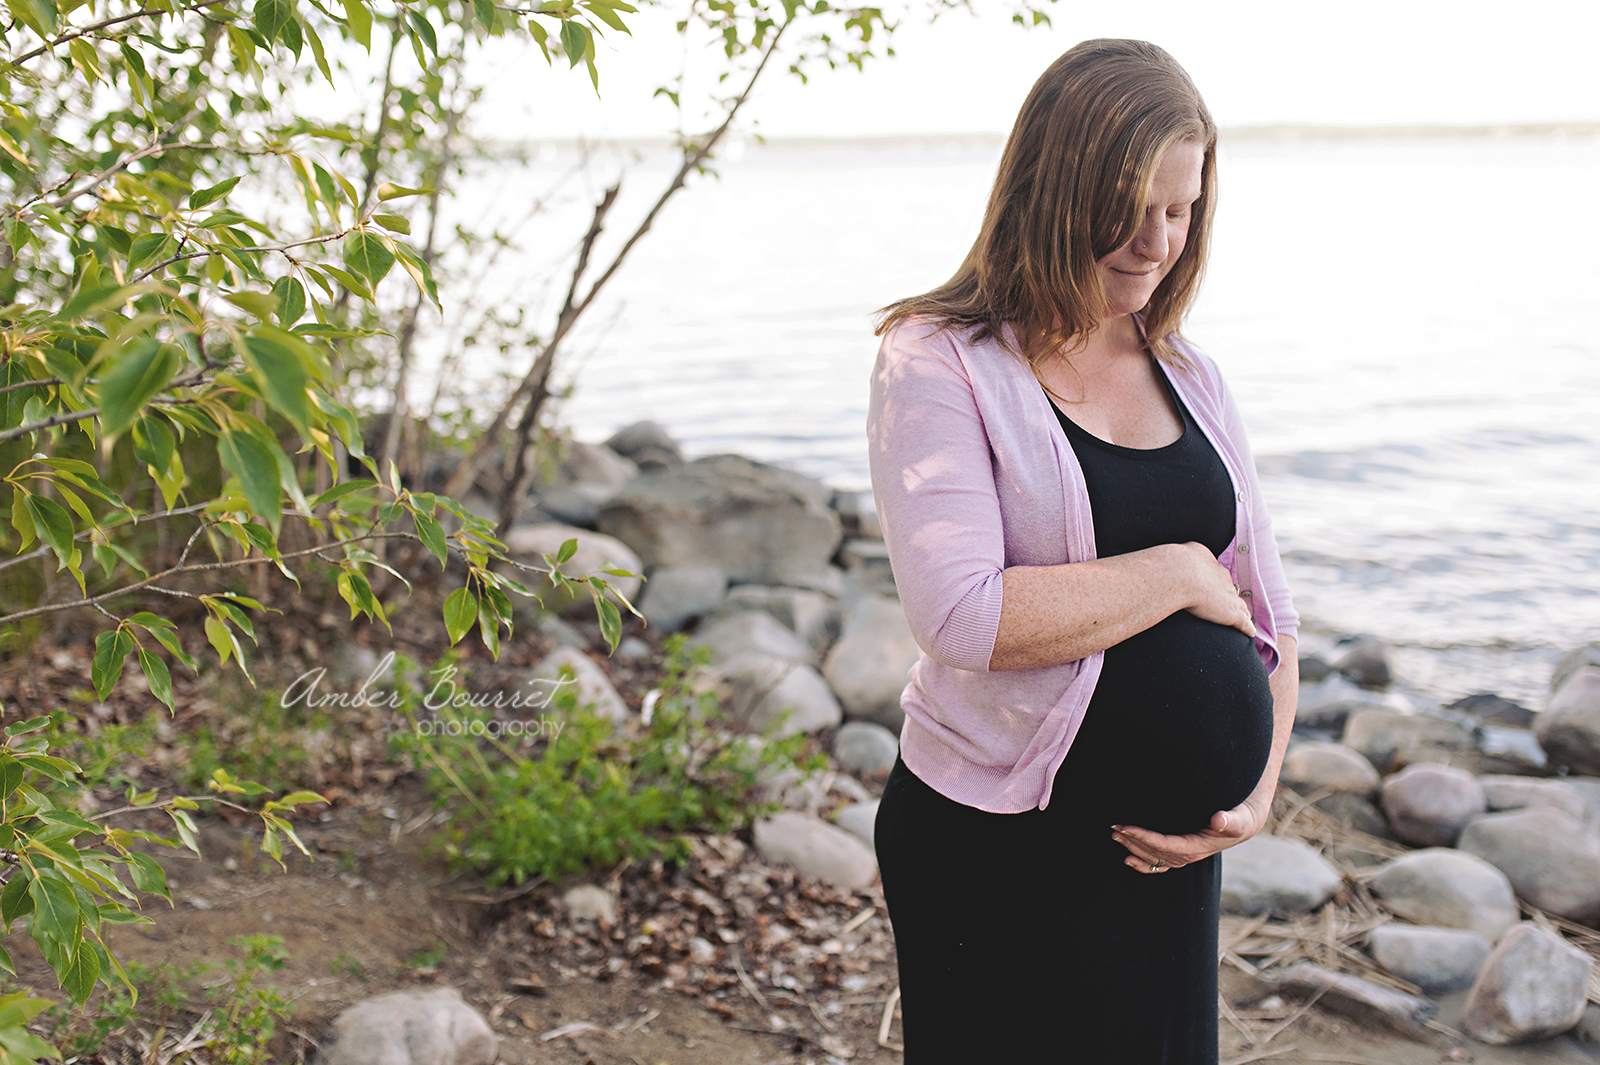 cc red deer maternity photography (90)